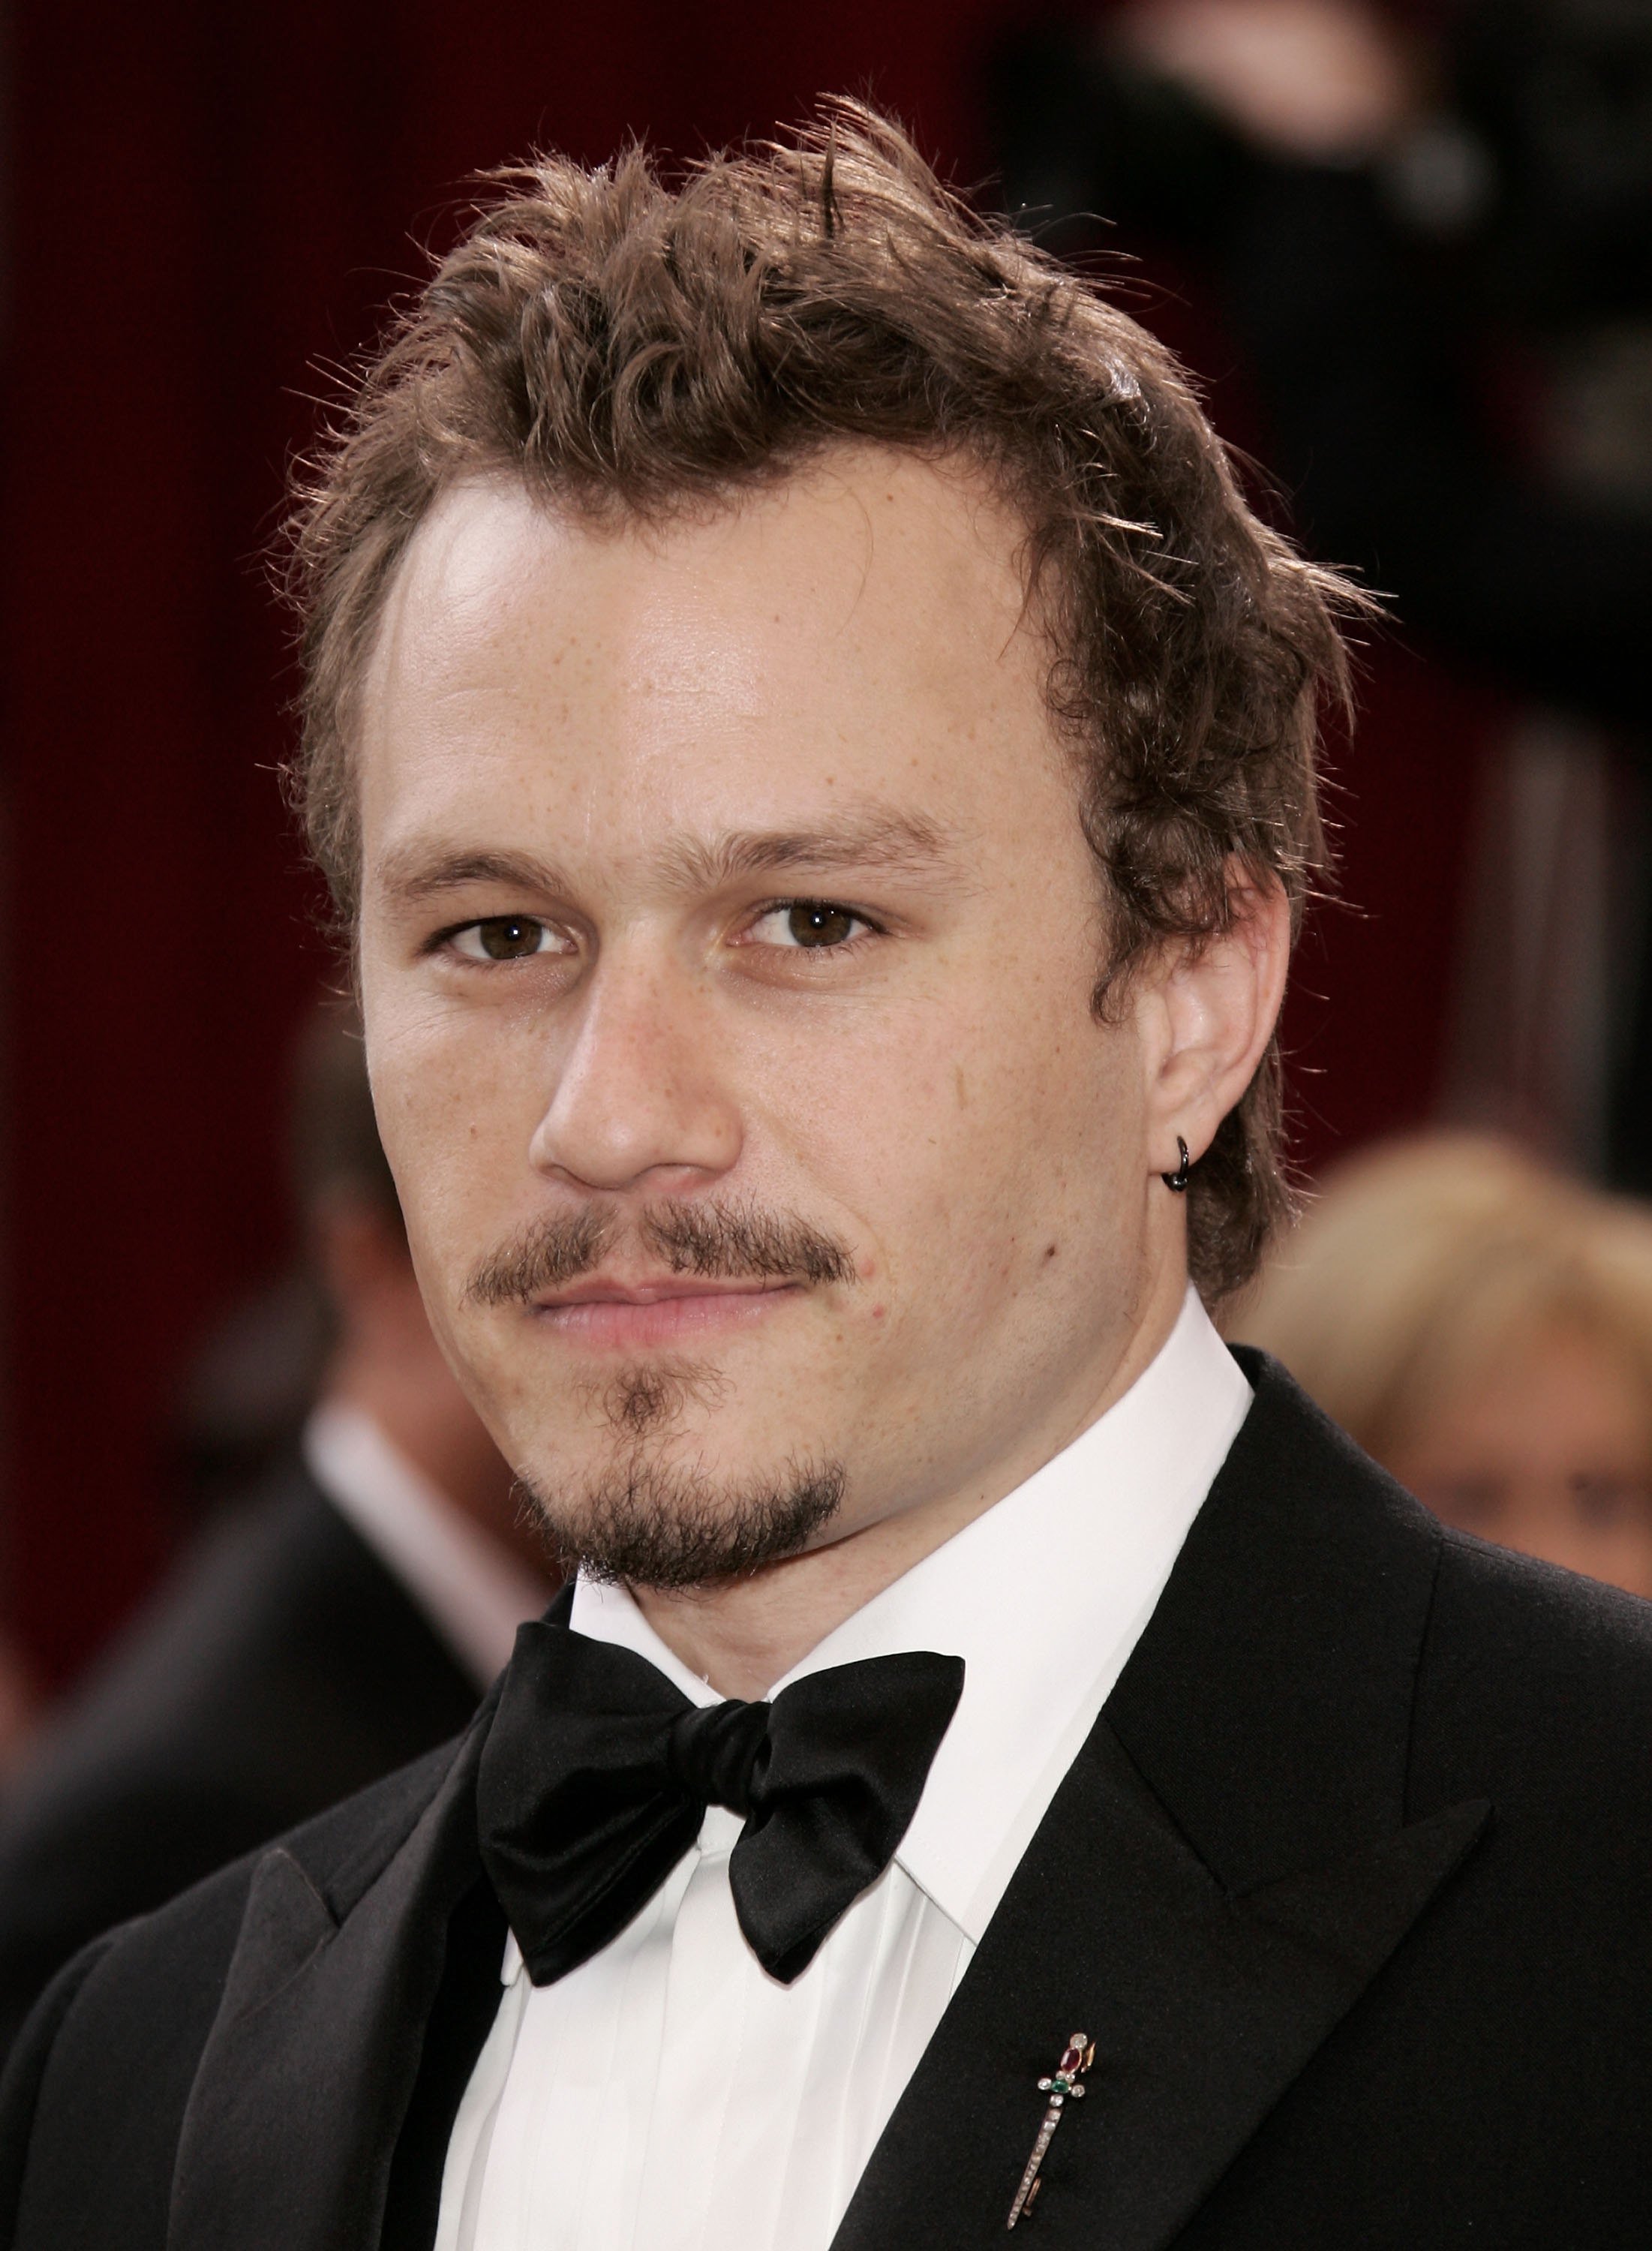 Heath Ledger at the 78th Annual Academy Awards on March 5, 2006 | Source: Getty Images